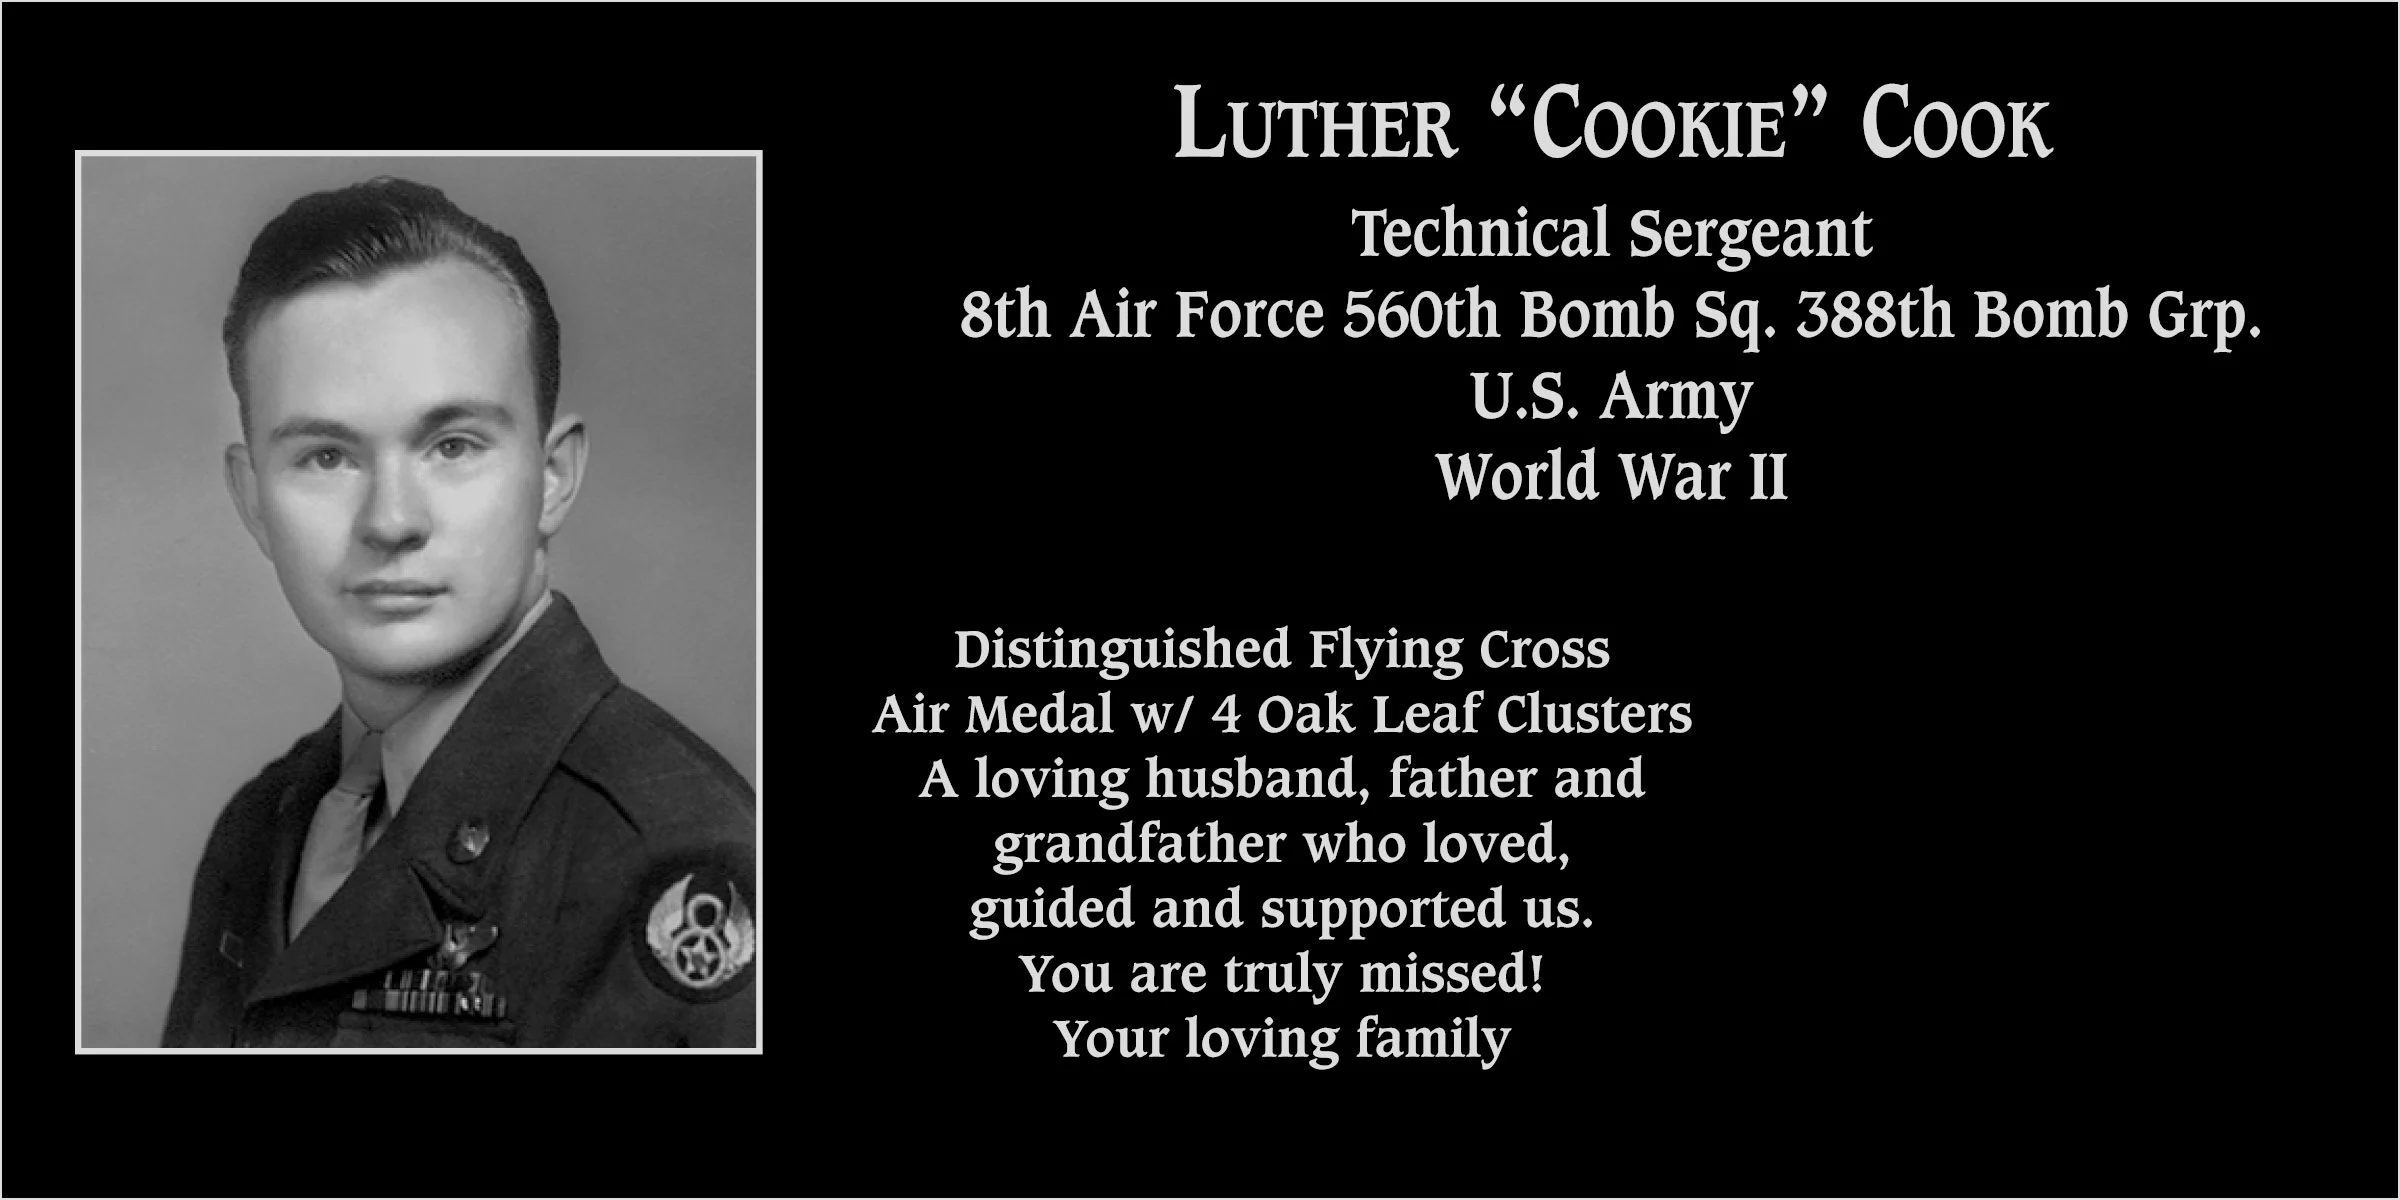 Luther Cook